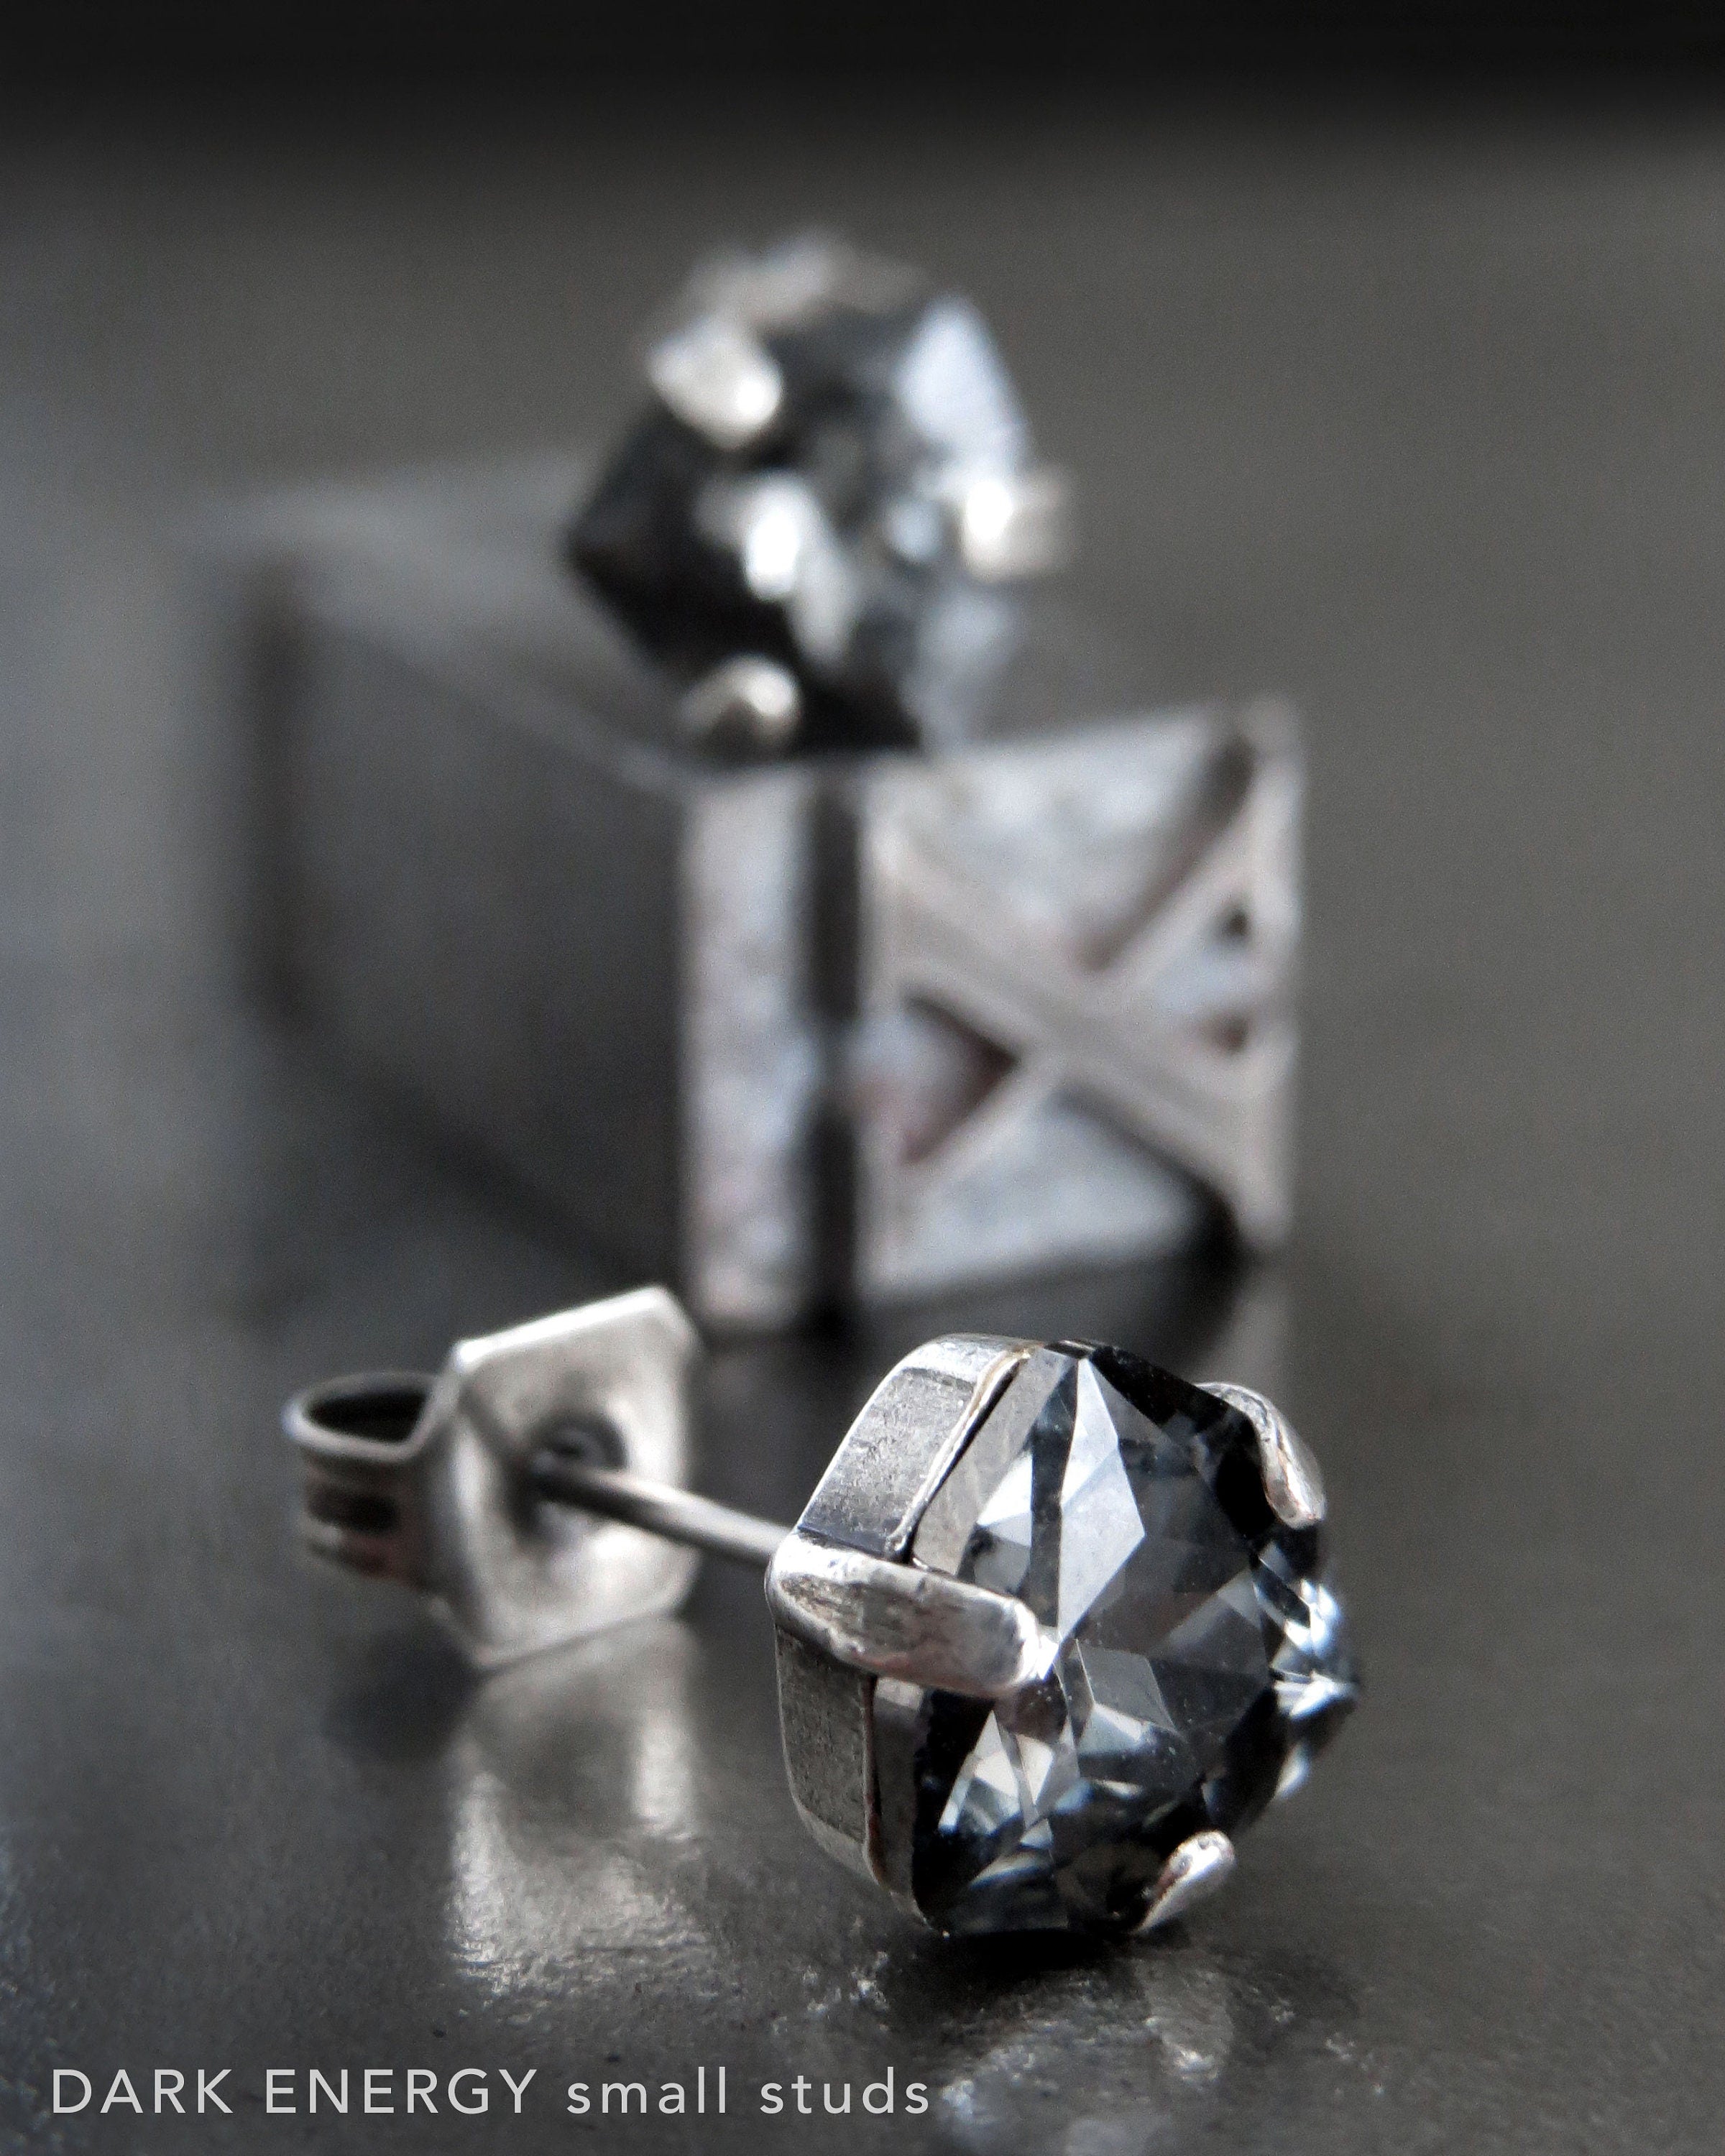 DARK ENERGY - Large Black Trilliant Crystal Stud Earrings, Dark Carbon Grey Triangle Crystal Post Studs, 2 Size Options: Large Small Studs